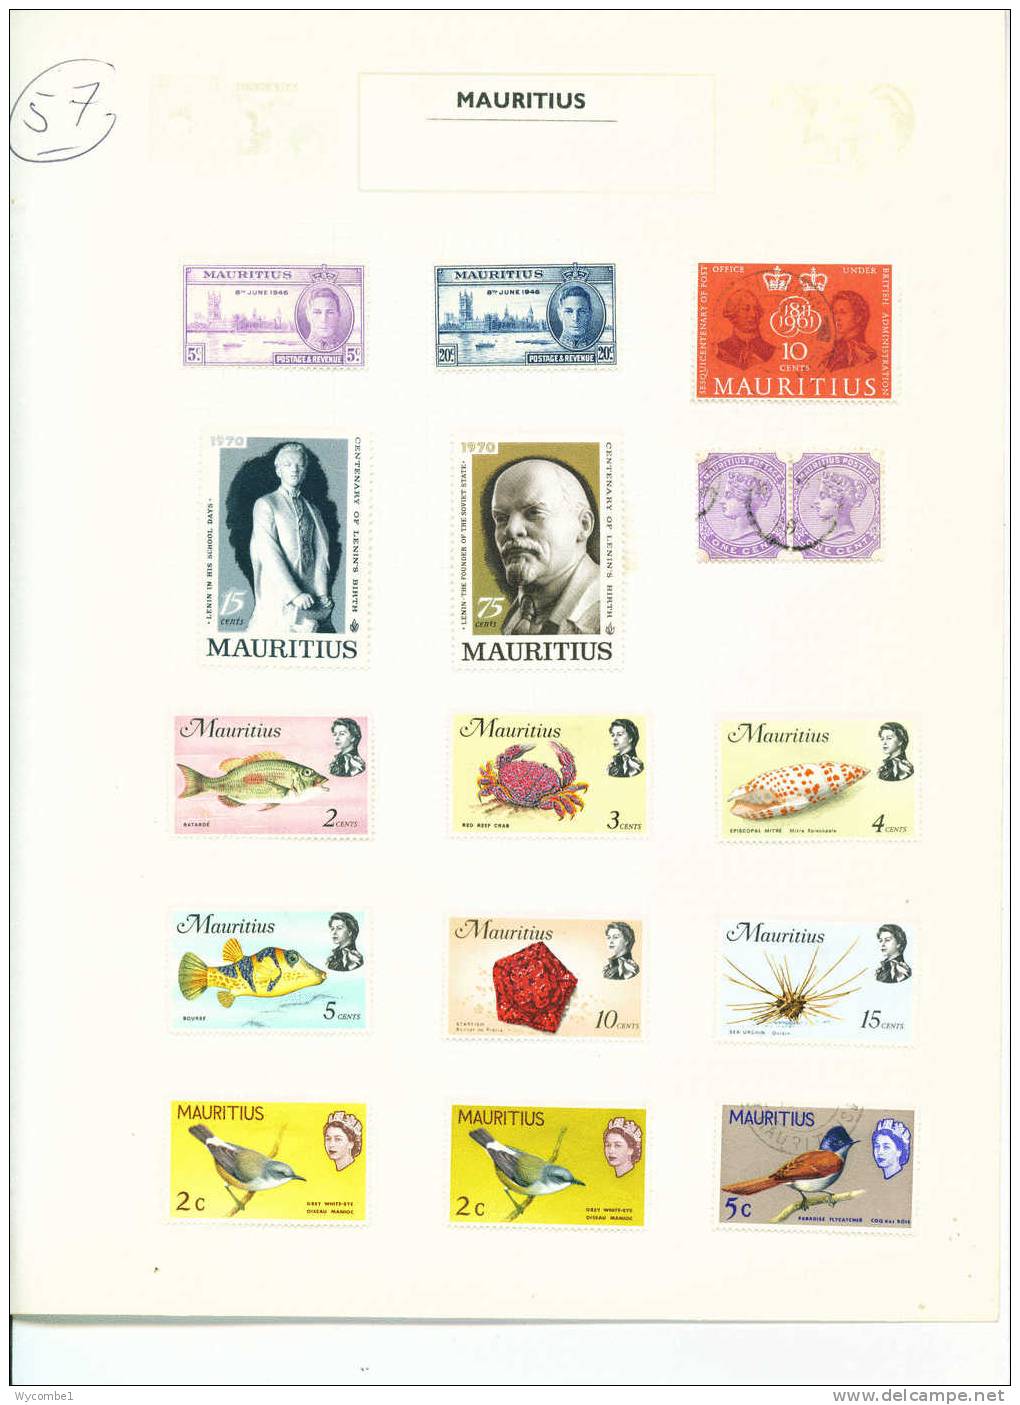 MAURITIUS - Album Page Of Stamps As Scan (Clearance Lot) - Mauritius (...-1967)